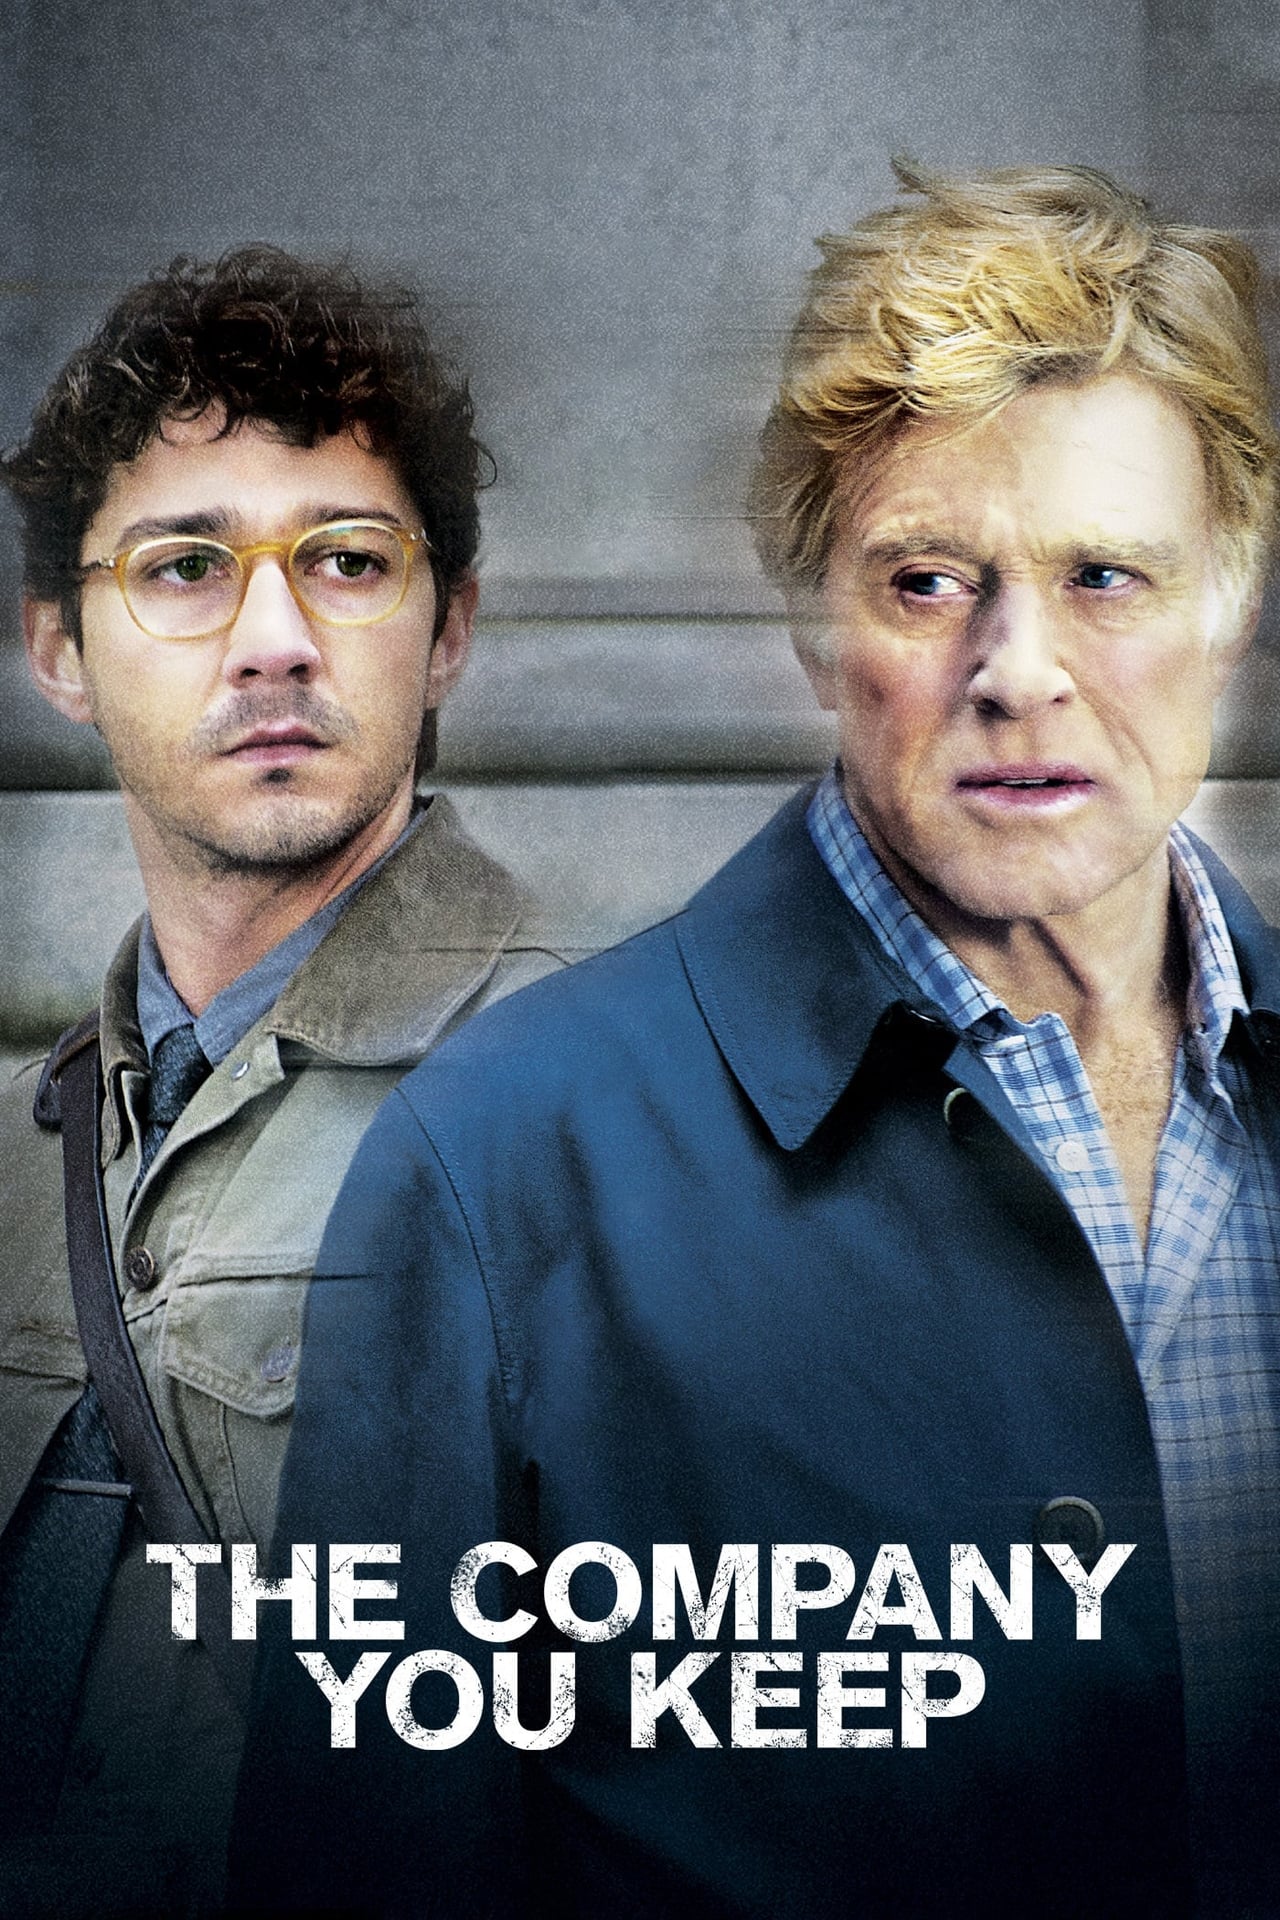 The Company You Keep wiki, synopsis, reviews, watch and download